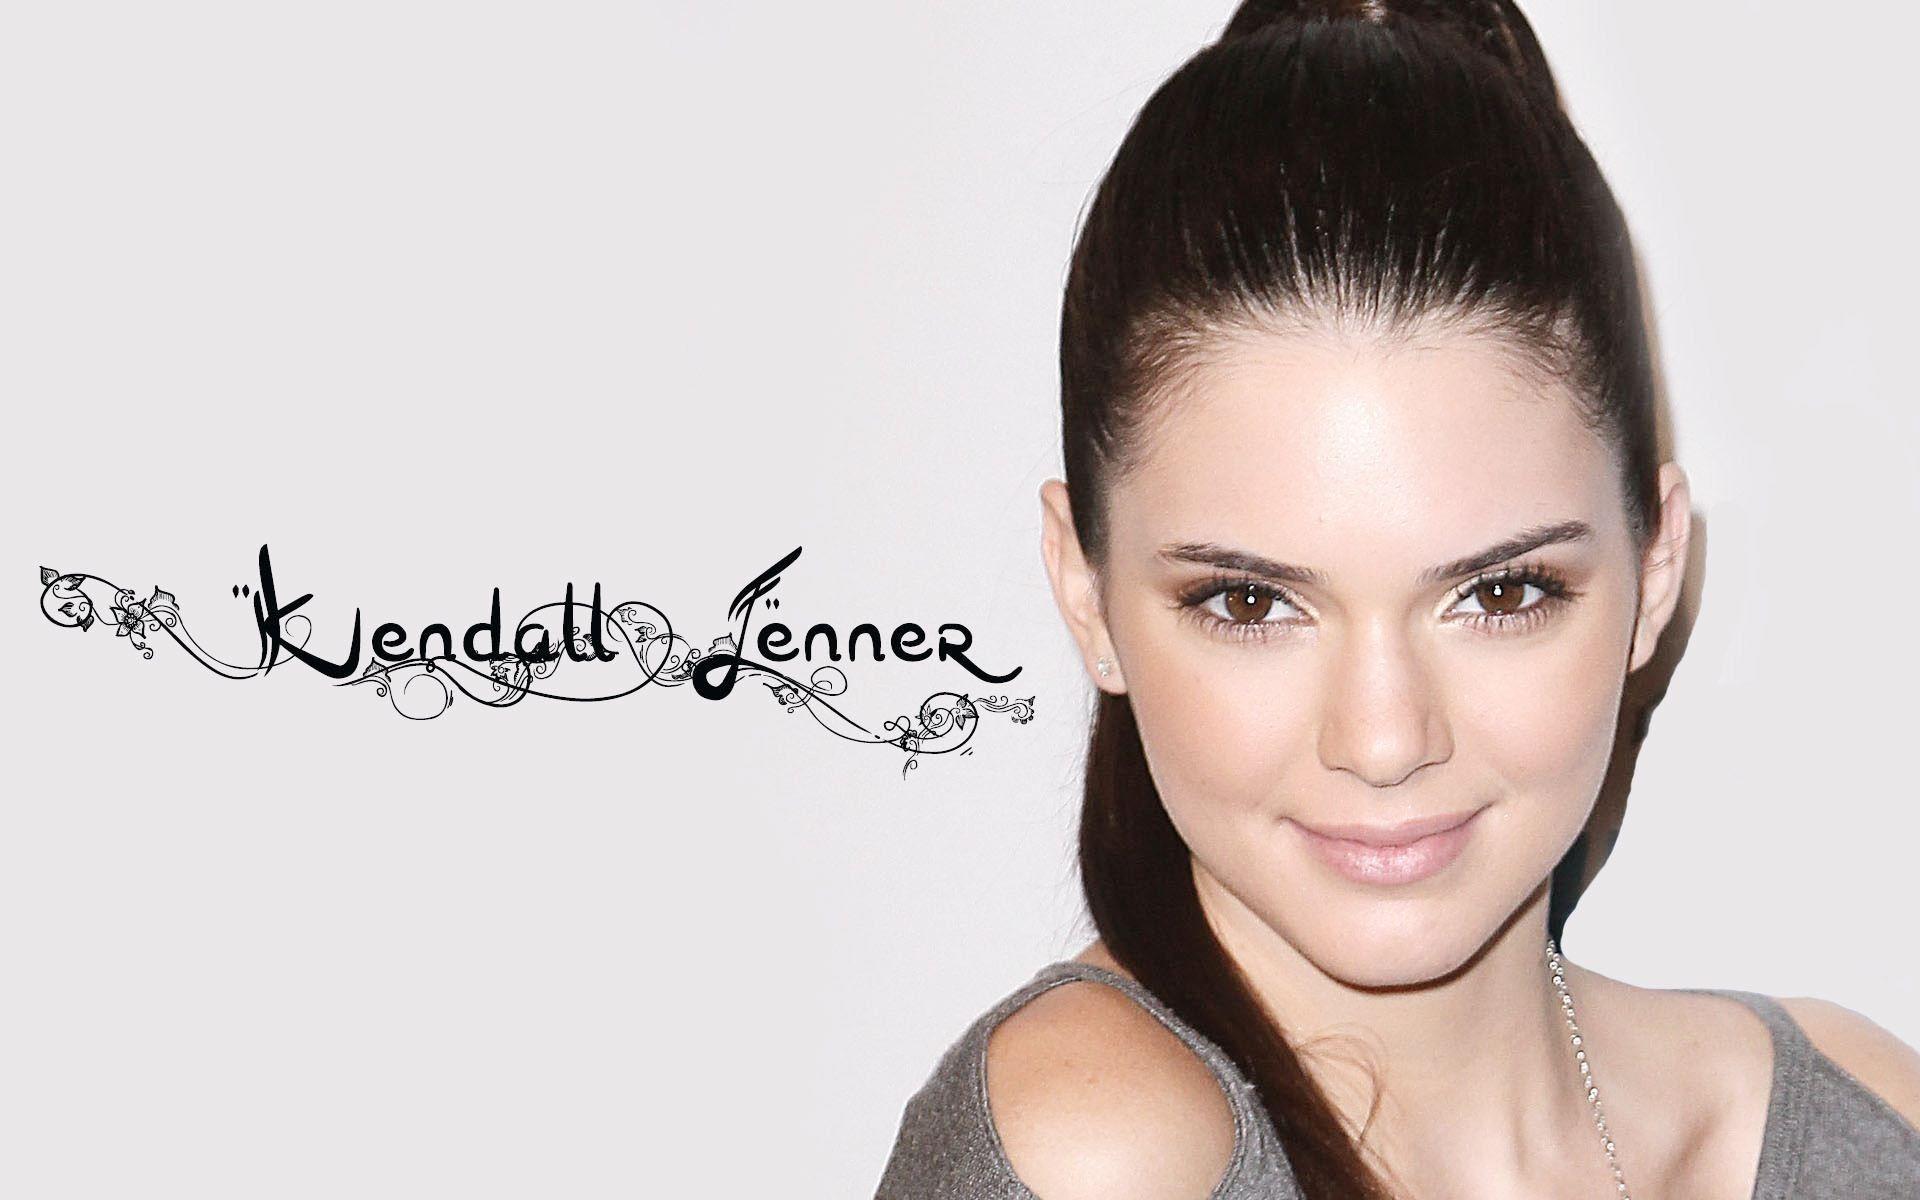 Kendall Jenner Wallpaper High Resolution and Quality Download